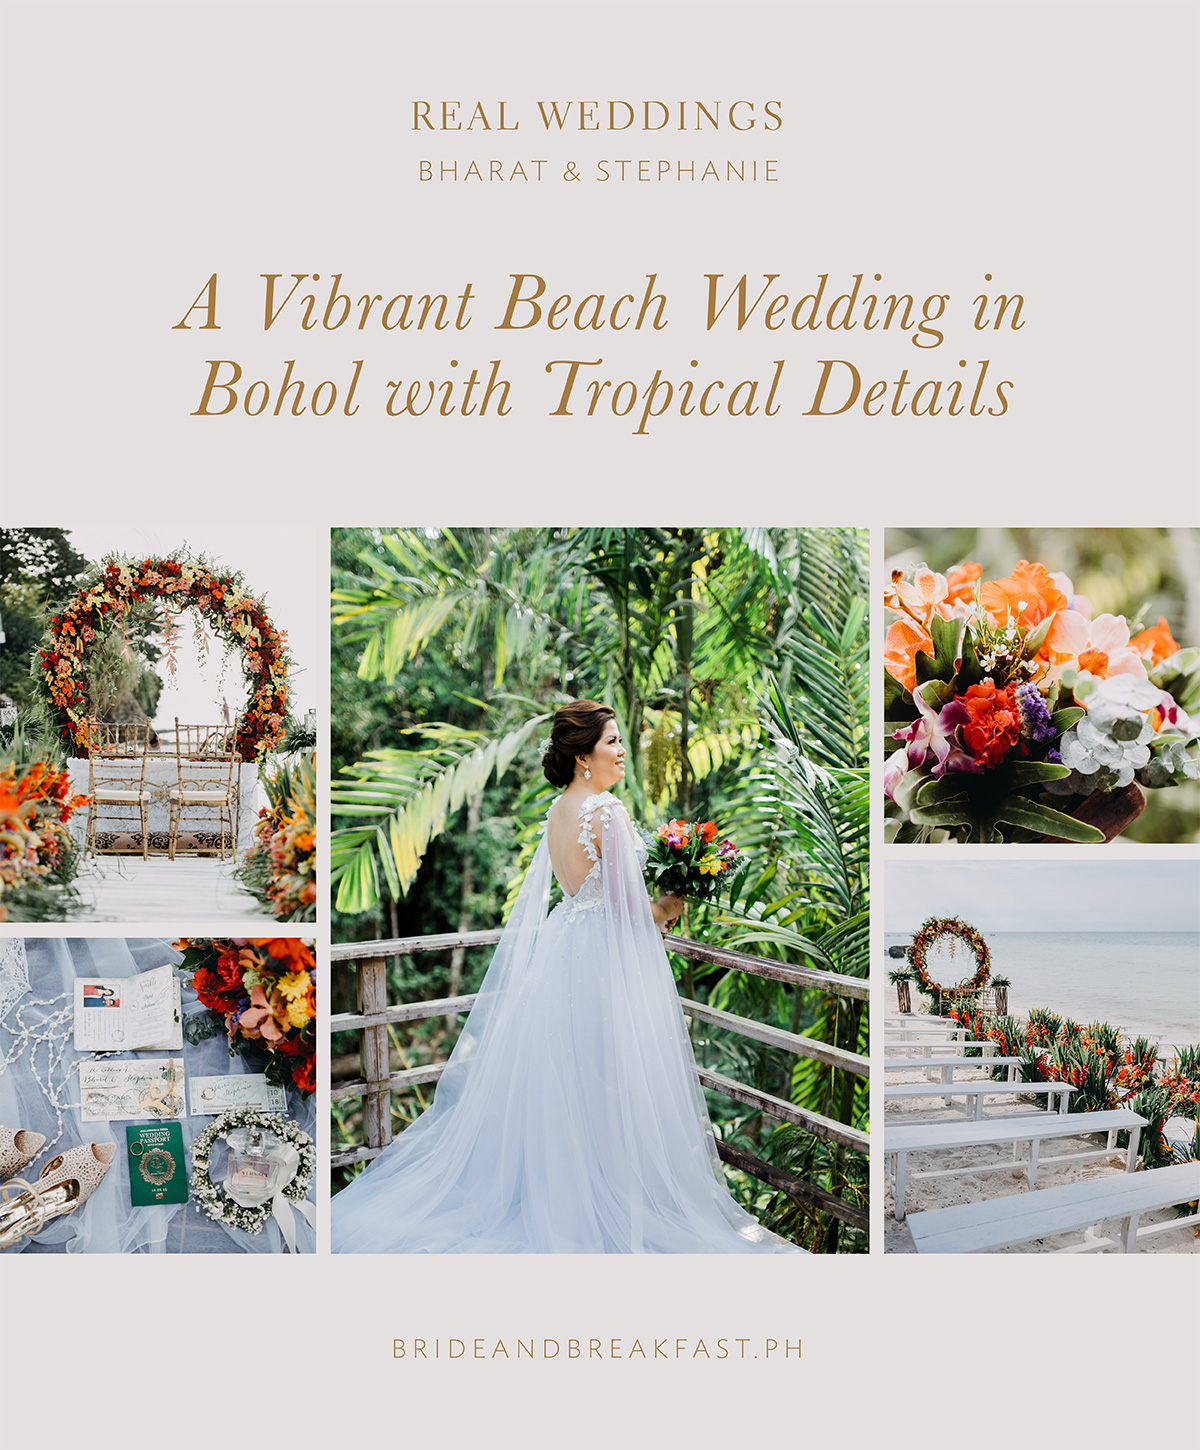 A Vibrant Beach Wedding in Bohol with Tropical Details